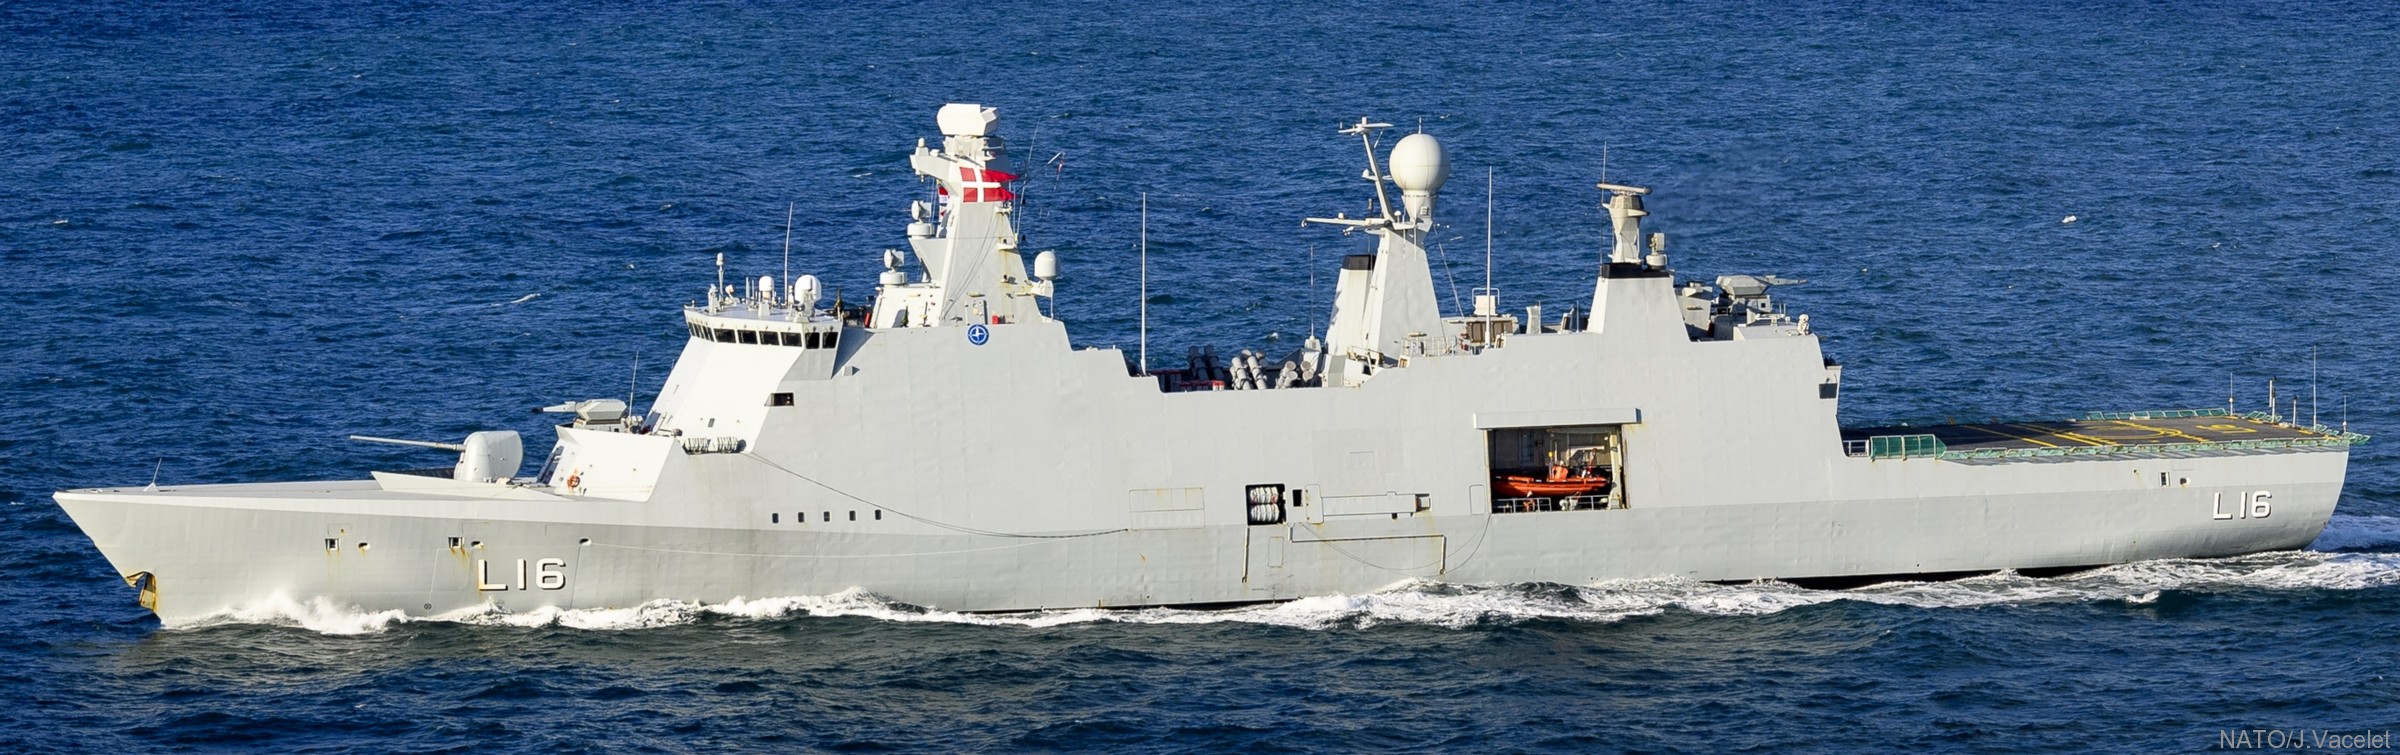 l-16 hdms absalon command support ship frigate royal danish navy 96